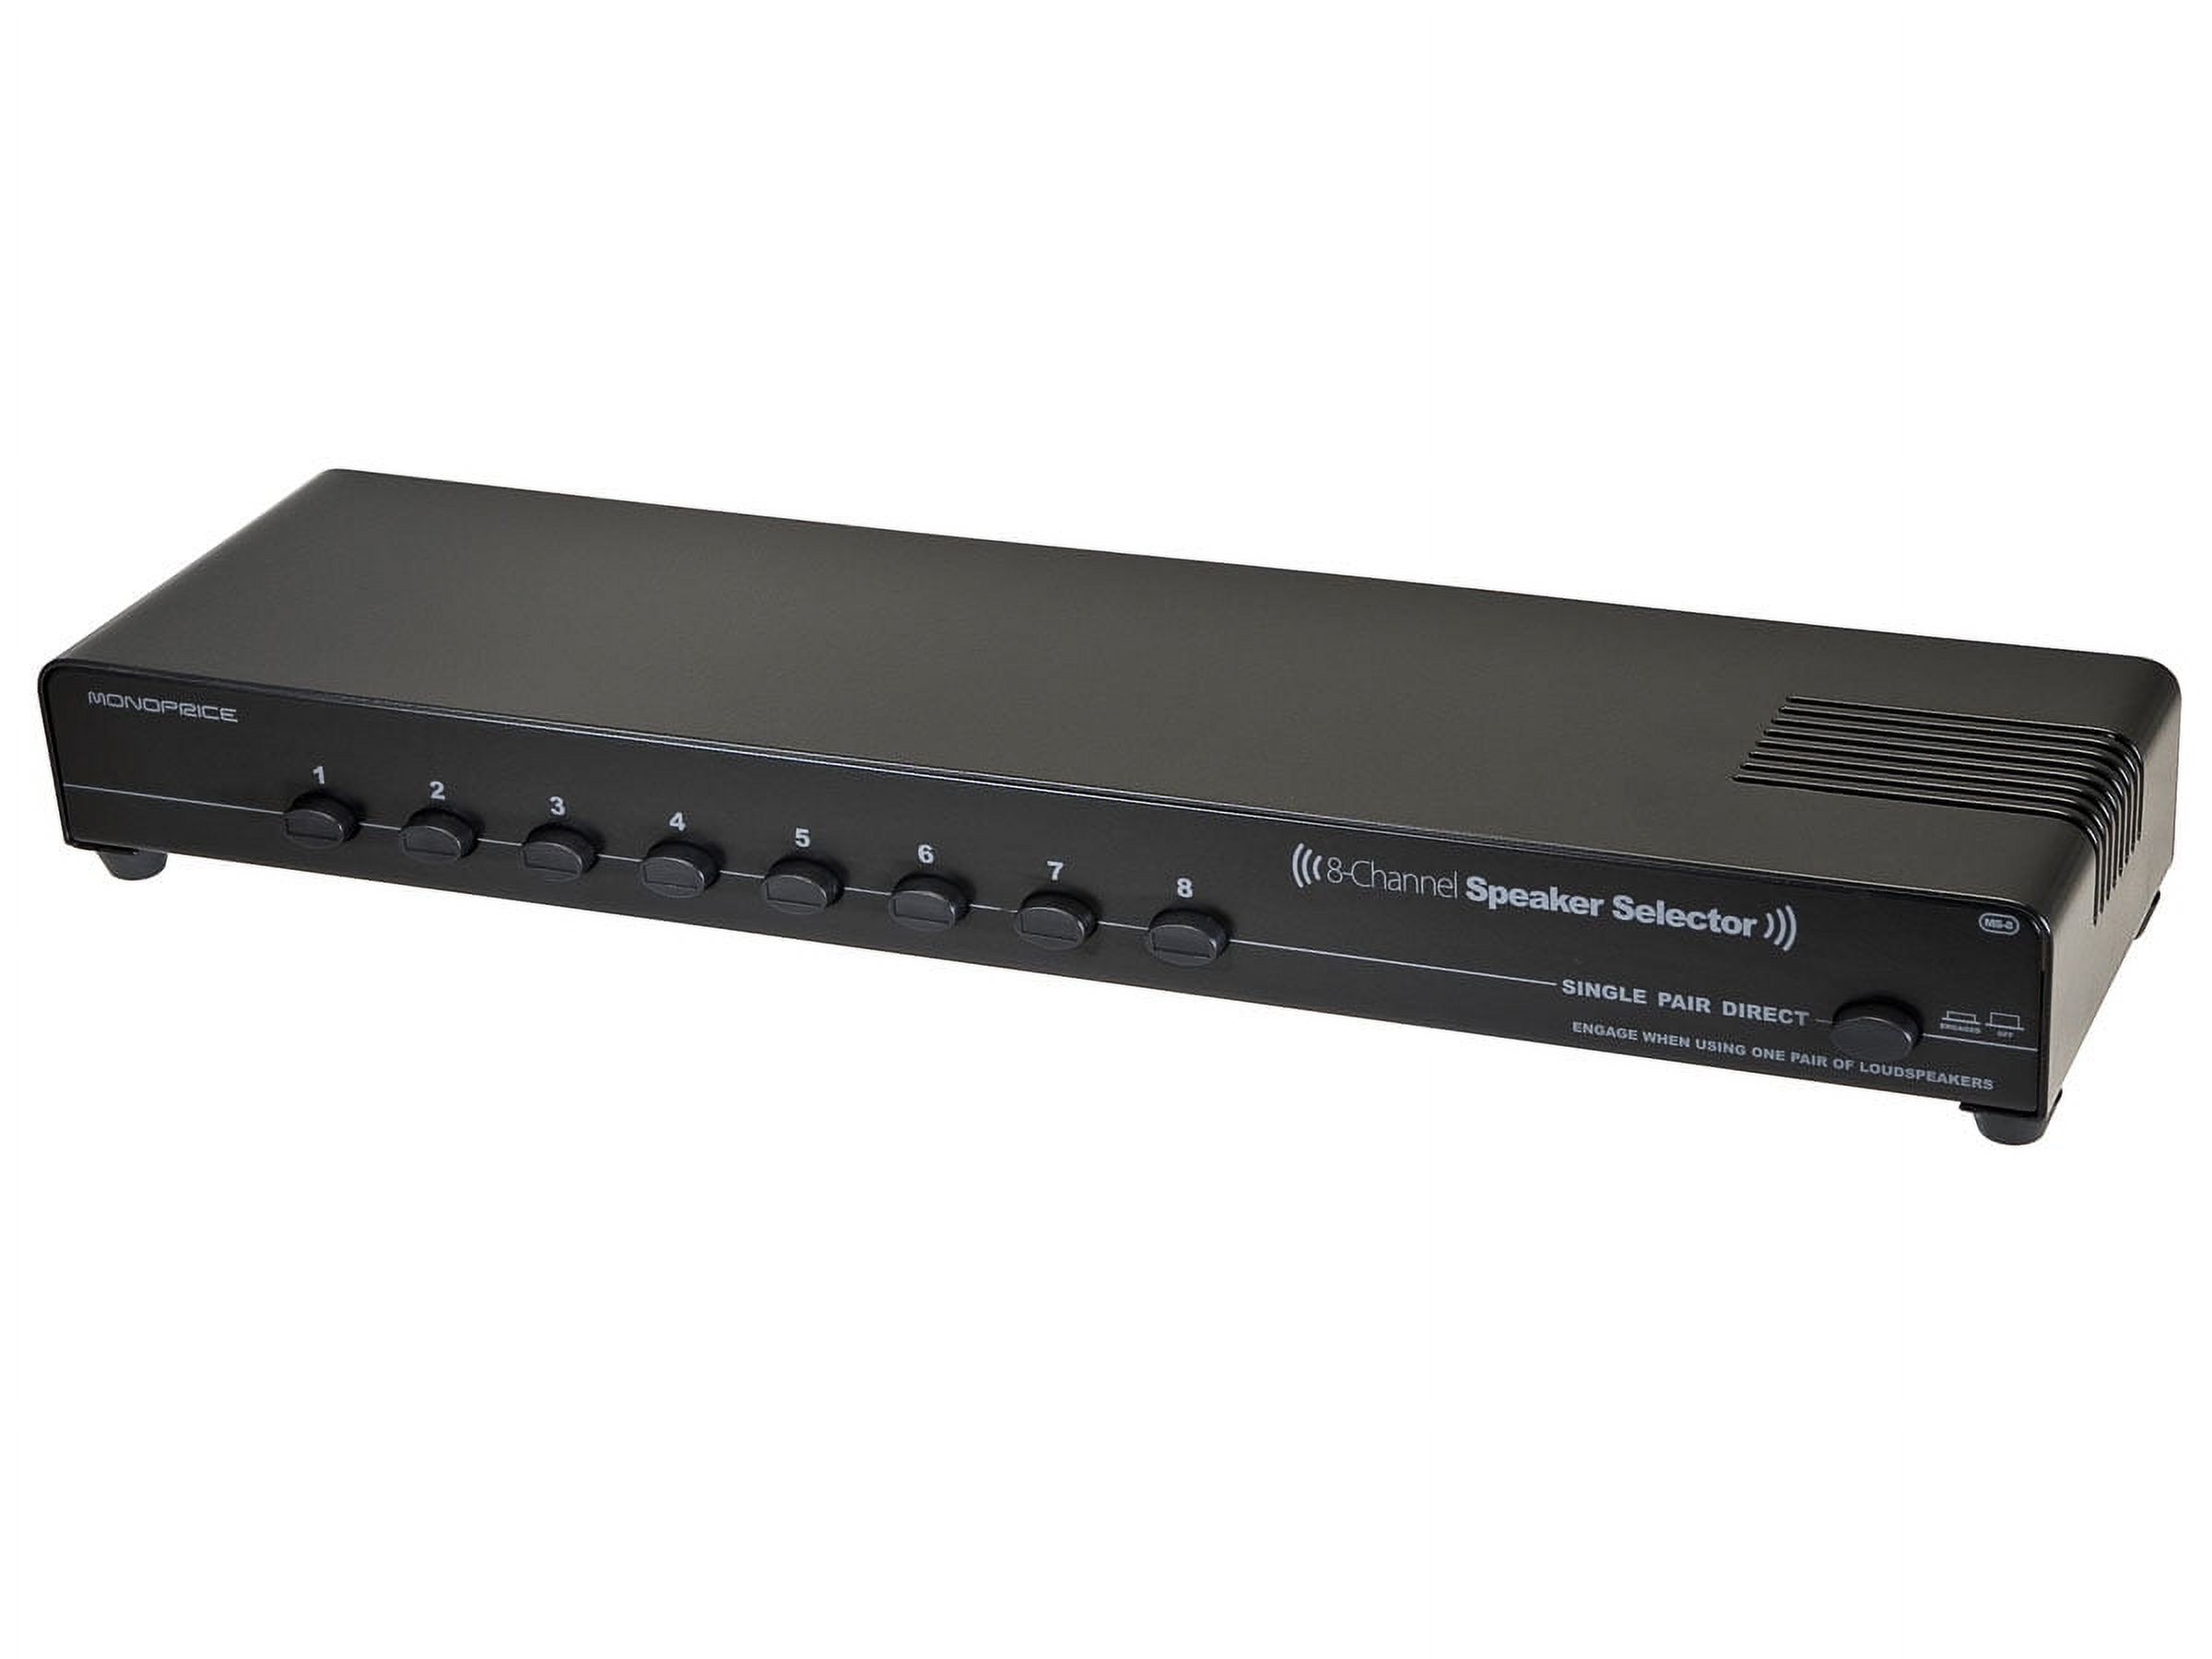 Monoprice 8-Channel Speaker Selector With Built-In Impedance-Matching Circuitry For Home Theater Audio - image 1 of 4